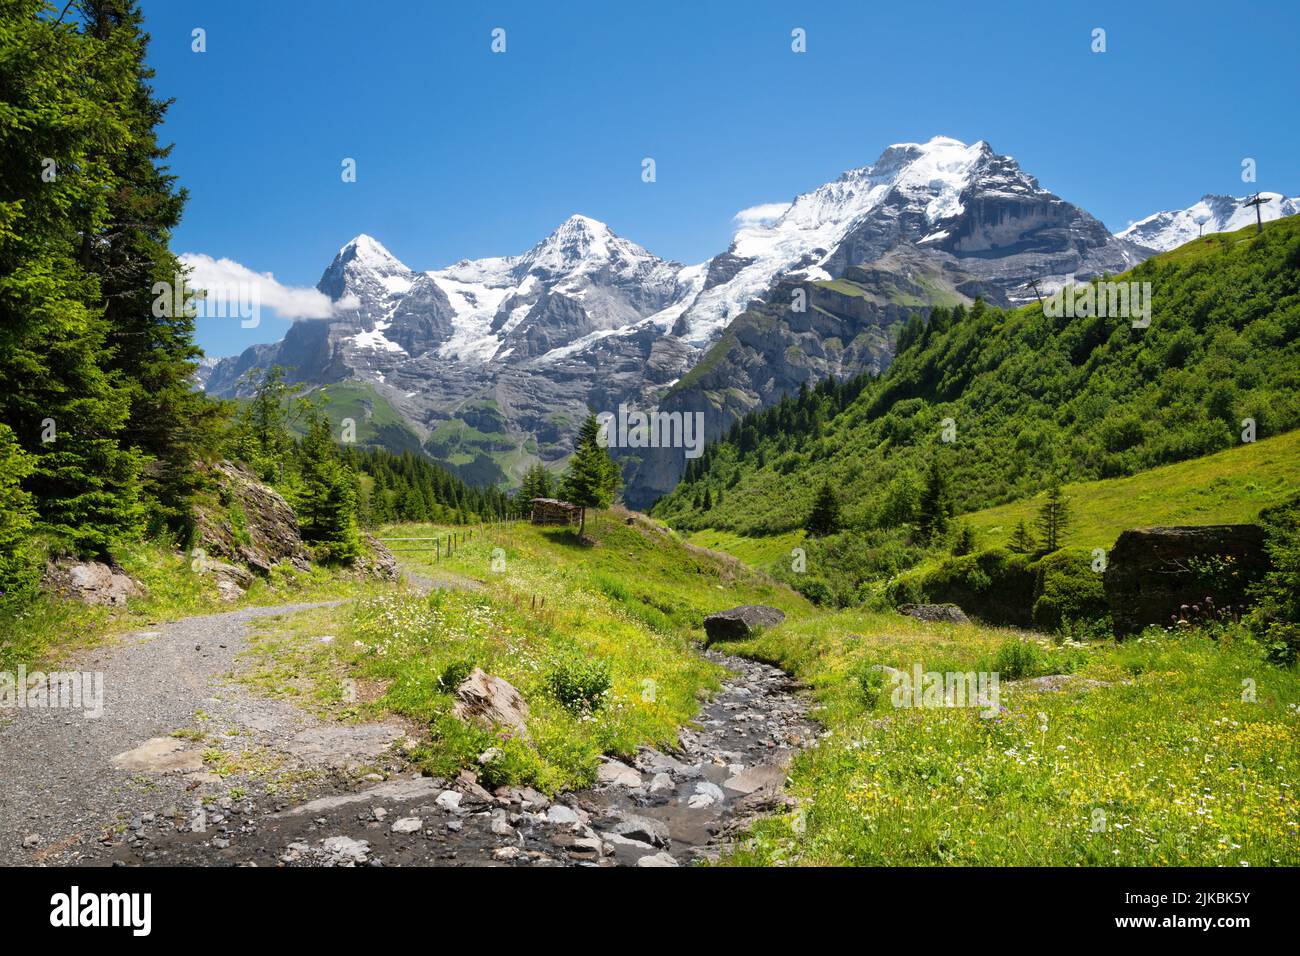 The Bernese alps with the Jungfrau, Monch and Eiger peaks. Stock Photo